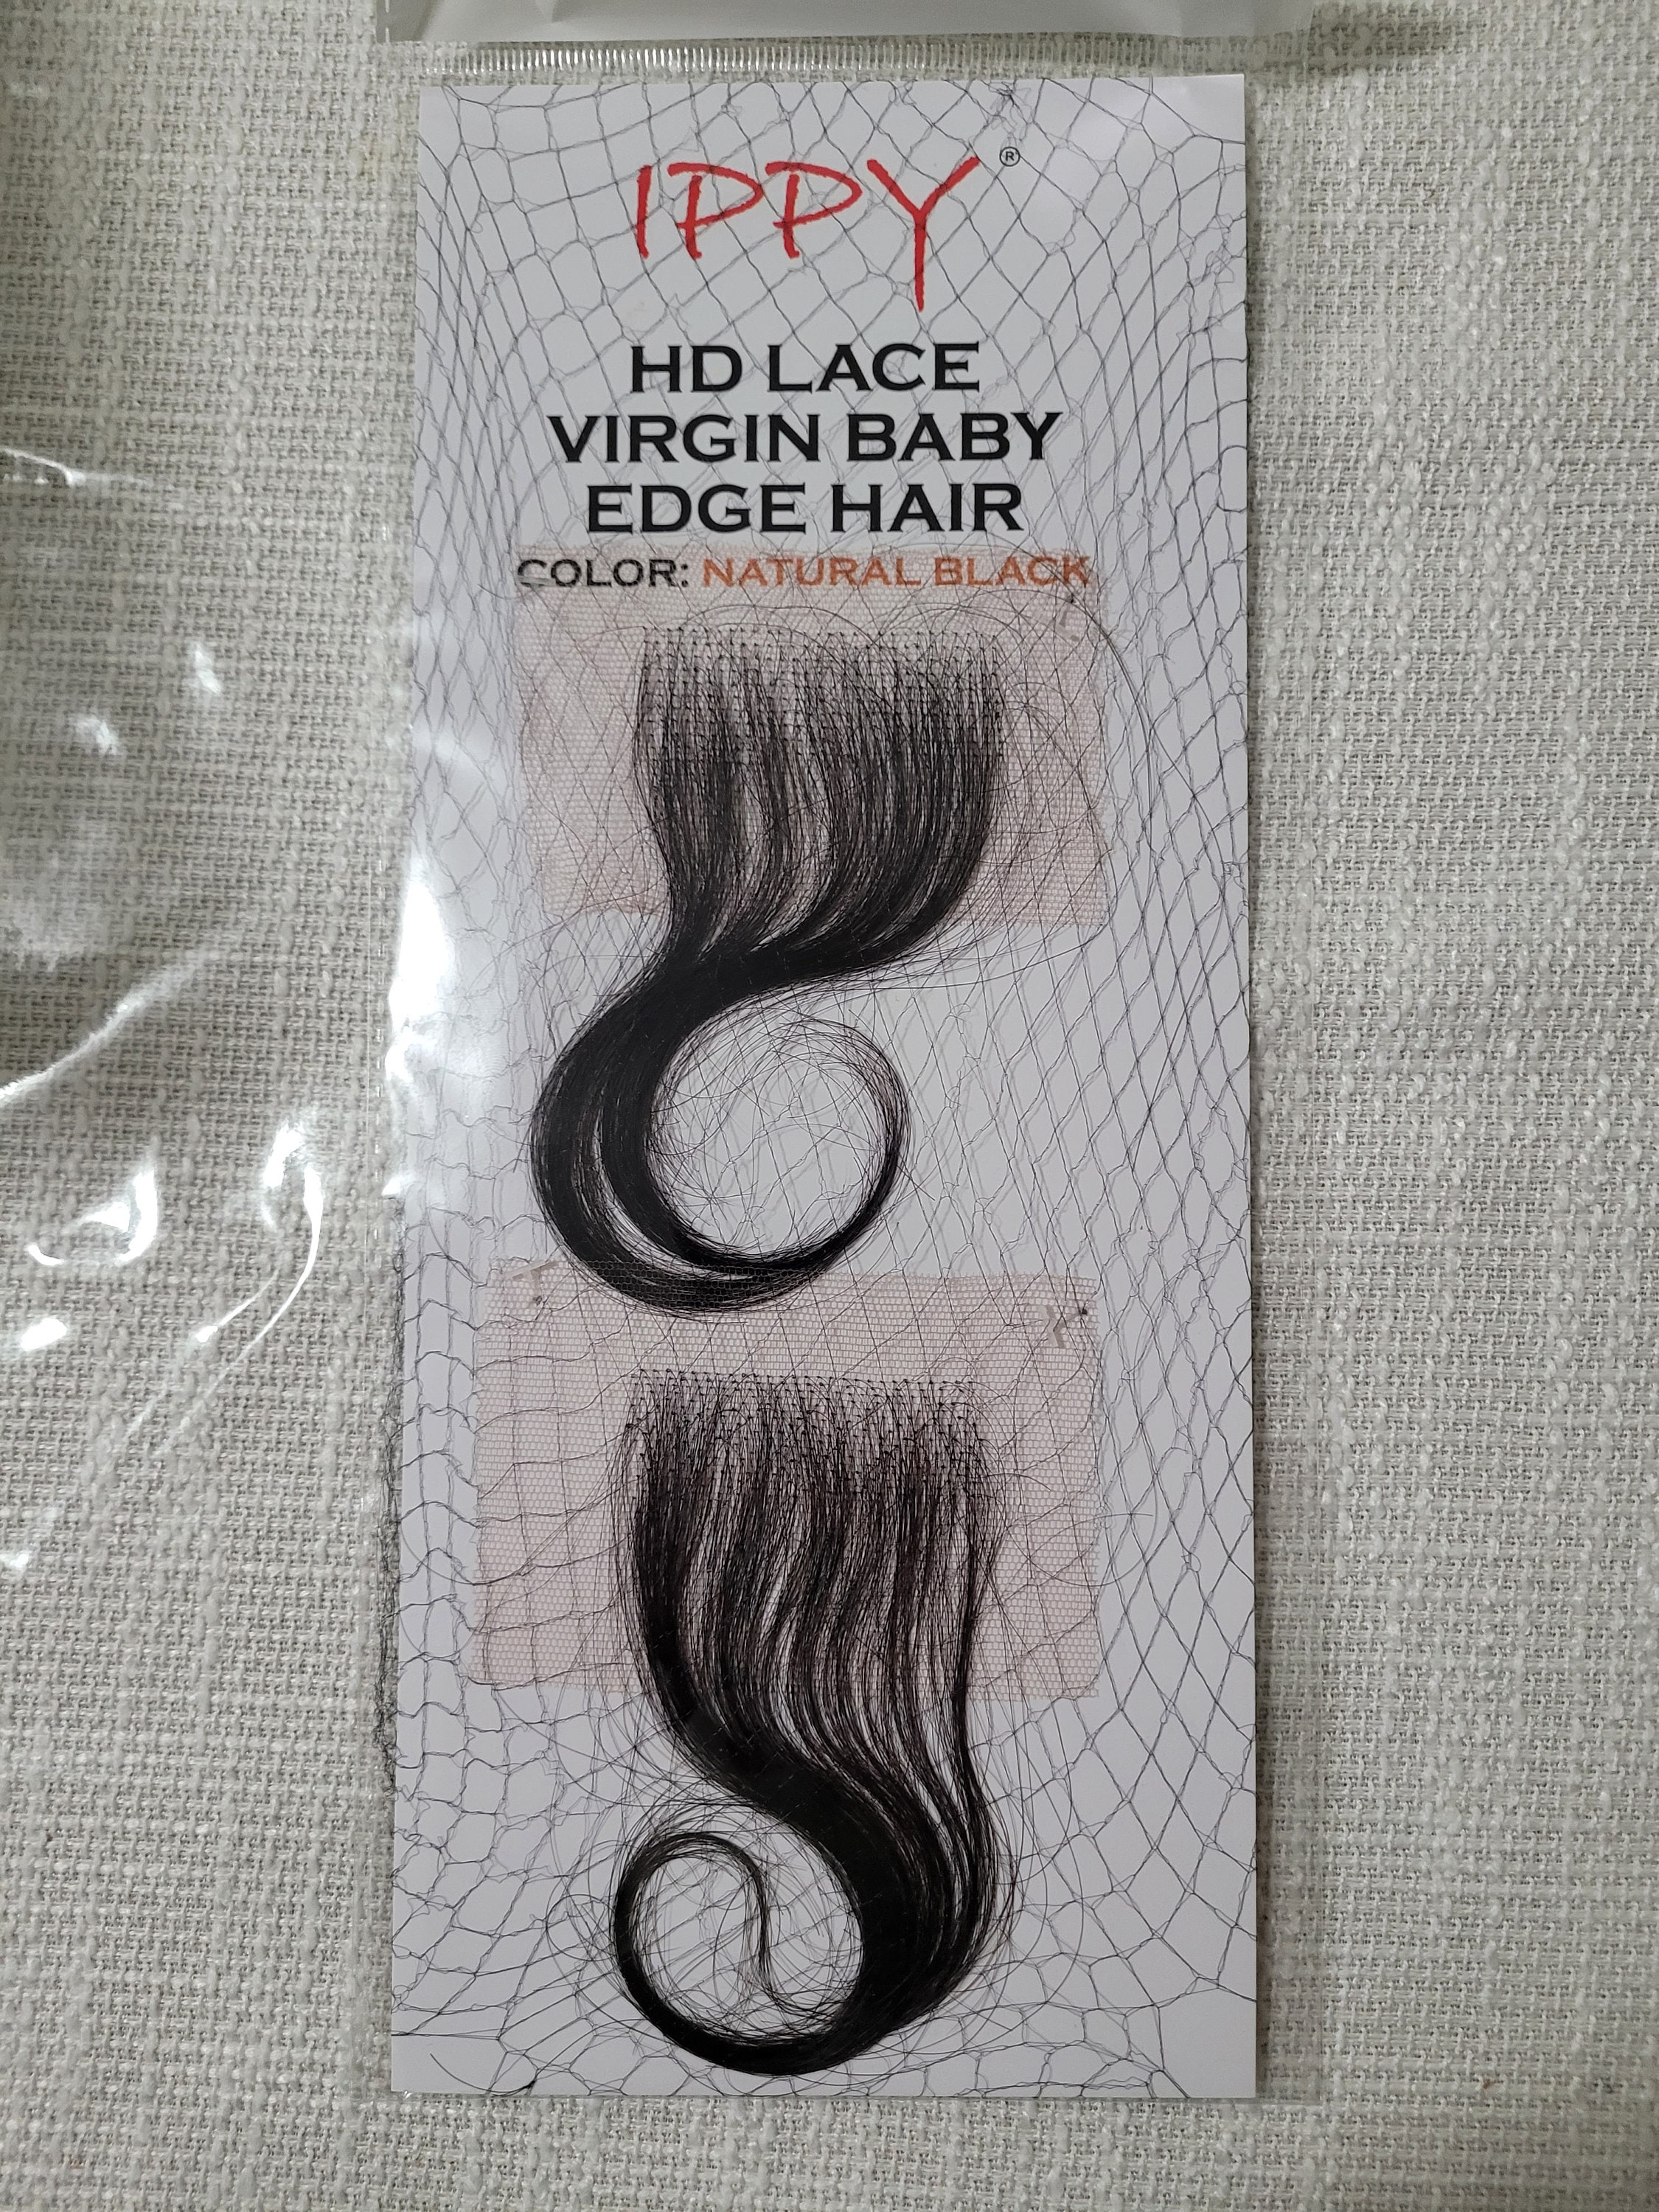 Lace Baby Human Hair Stripes Natural Baby Hair Edges for Black Women  Reusable US